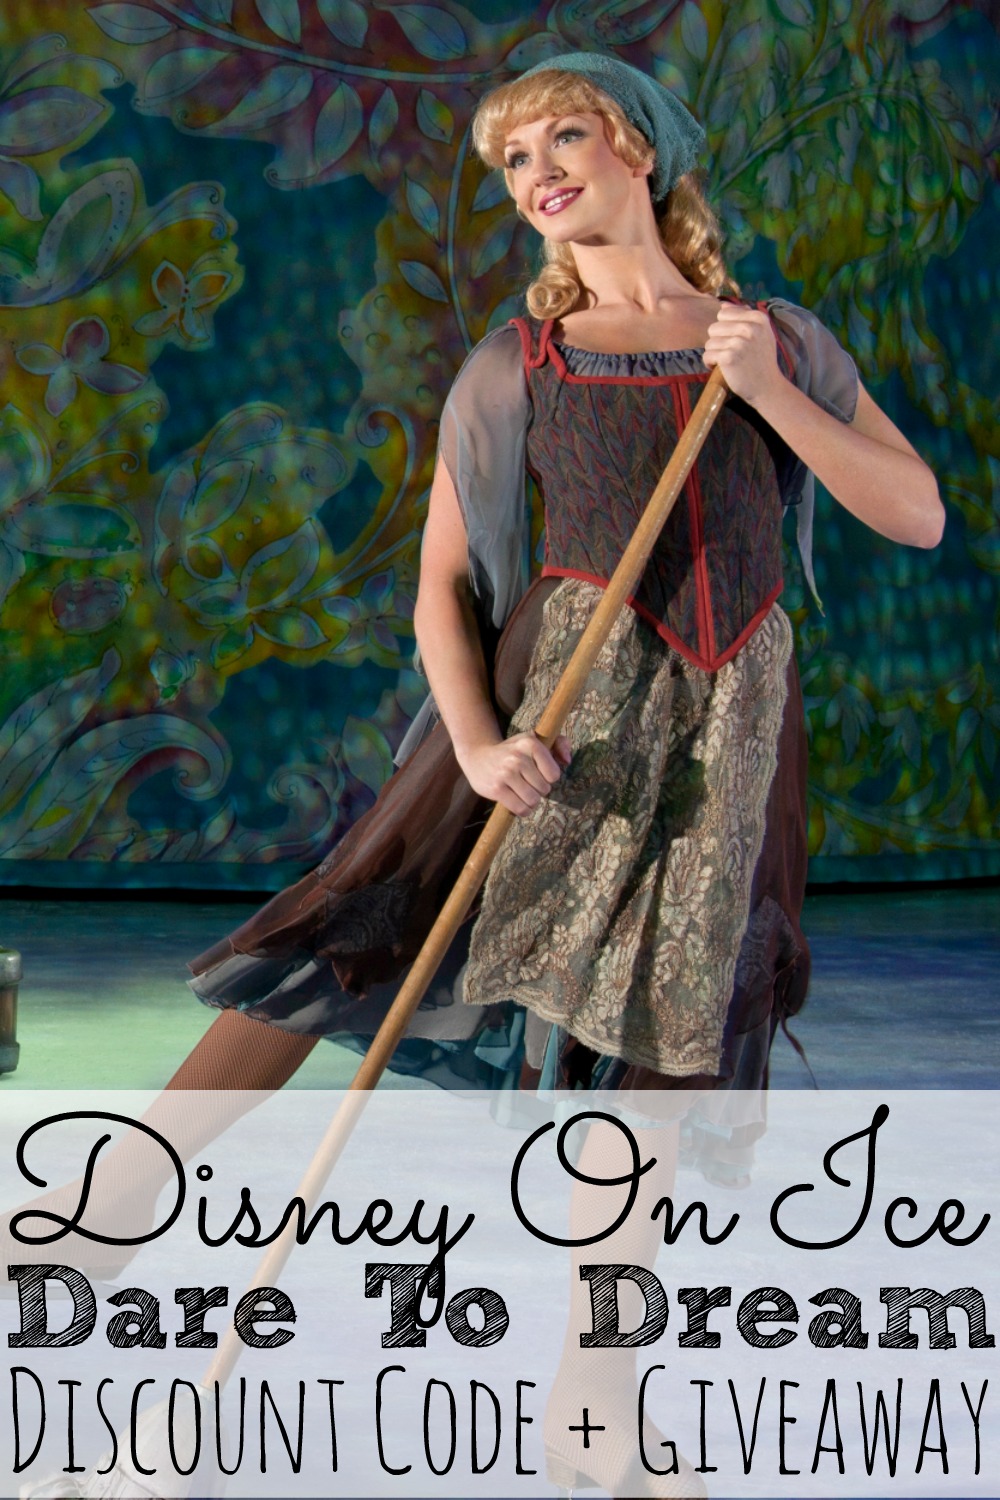 Disney On Ice Dare To Dream Discount Code + Giveaway - simplytodaylife.com